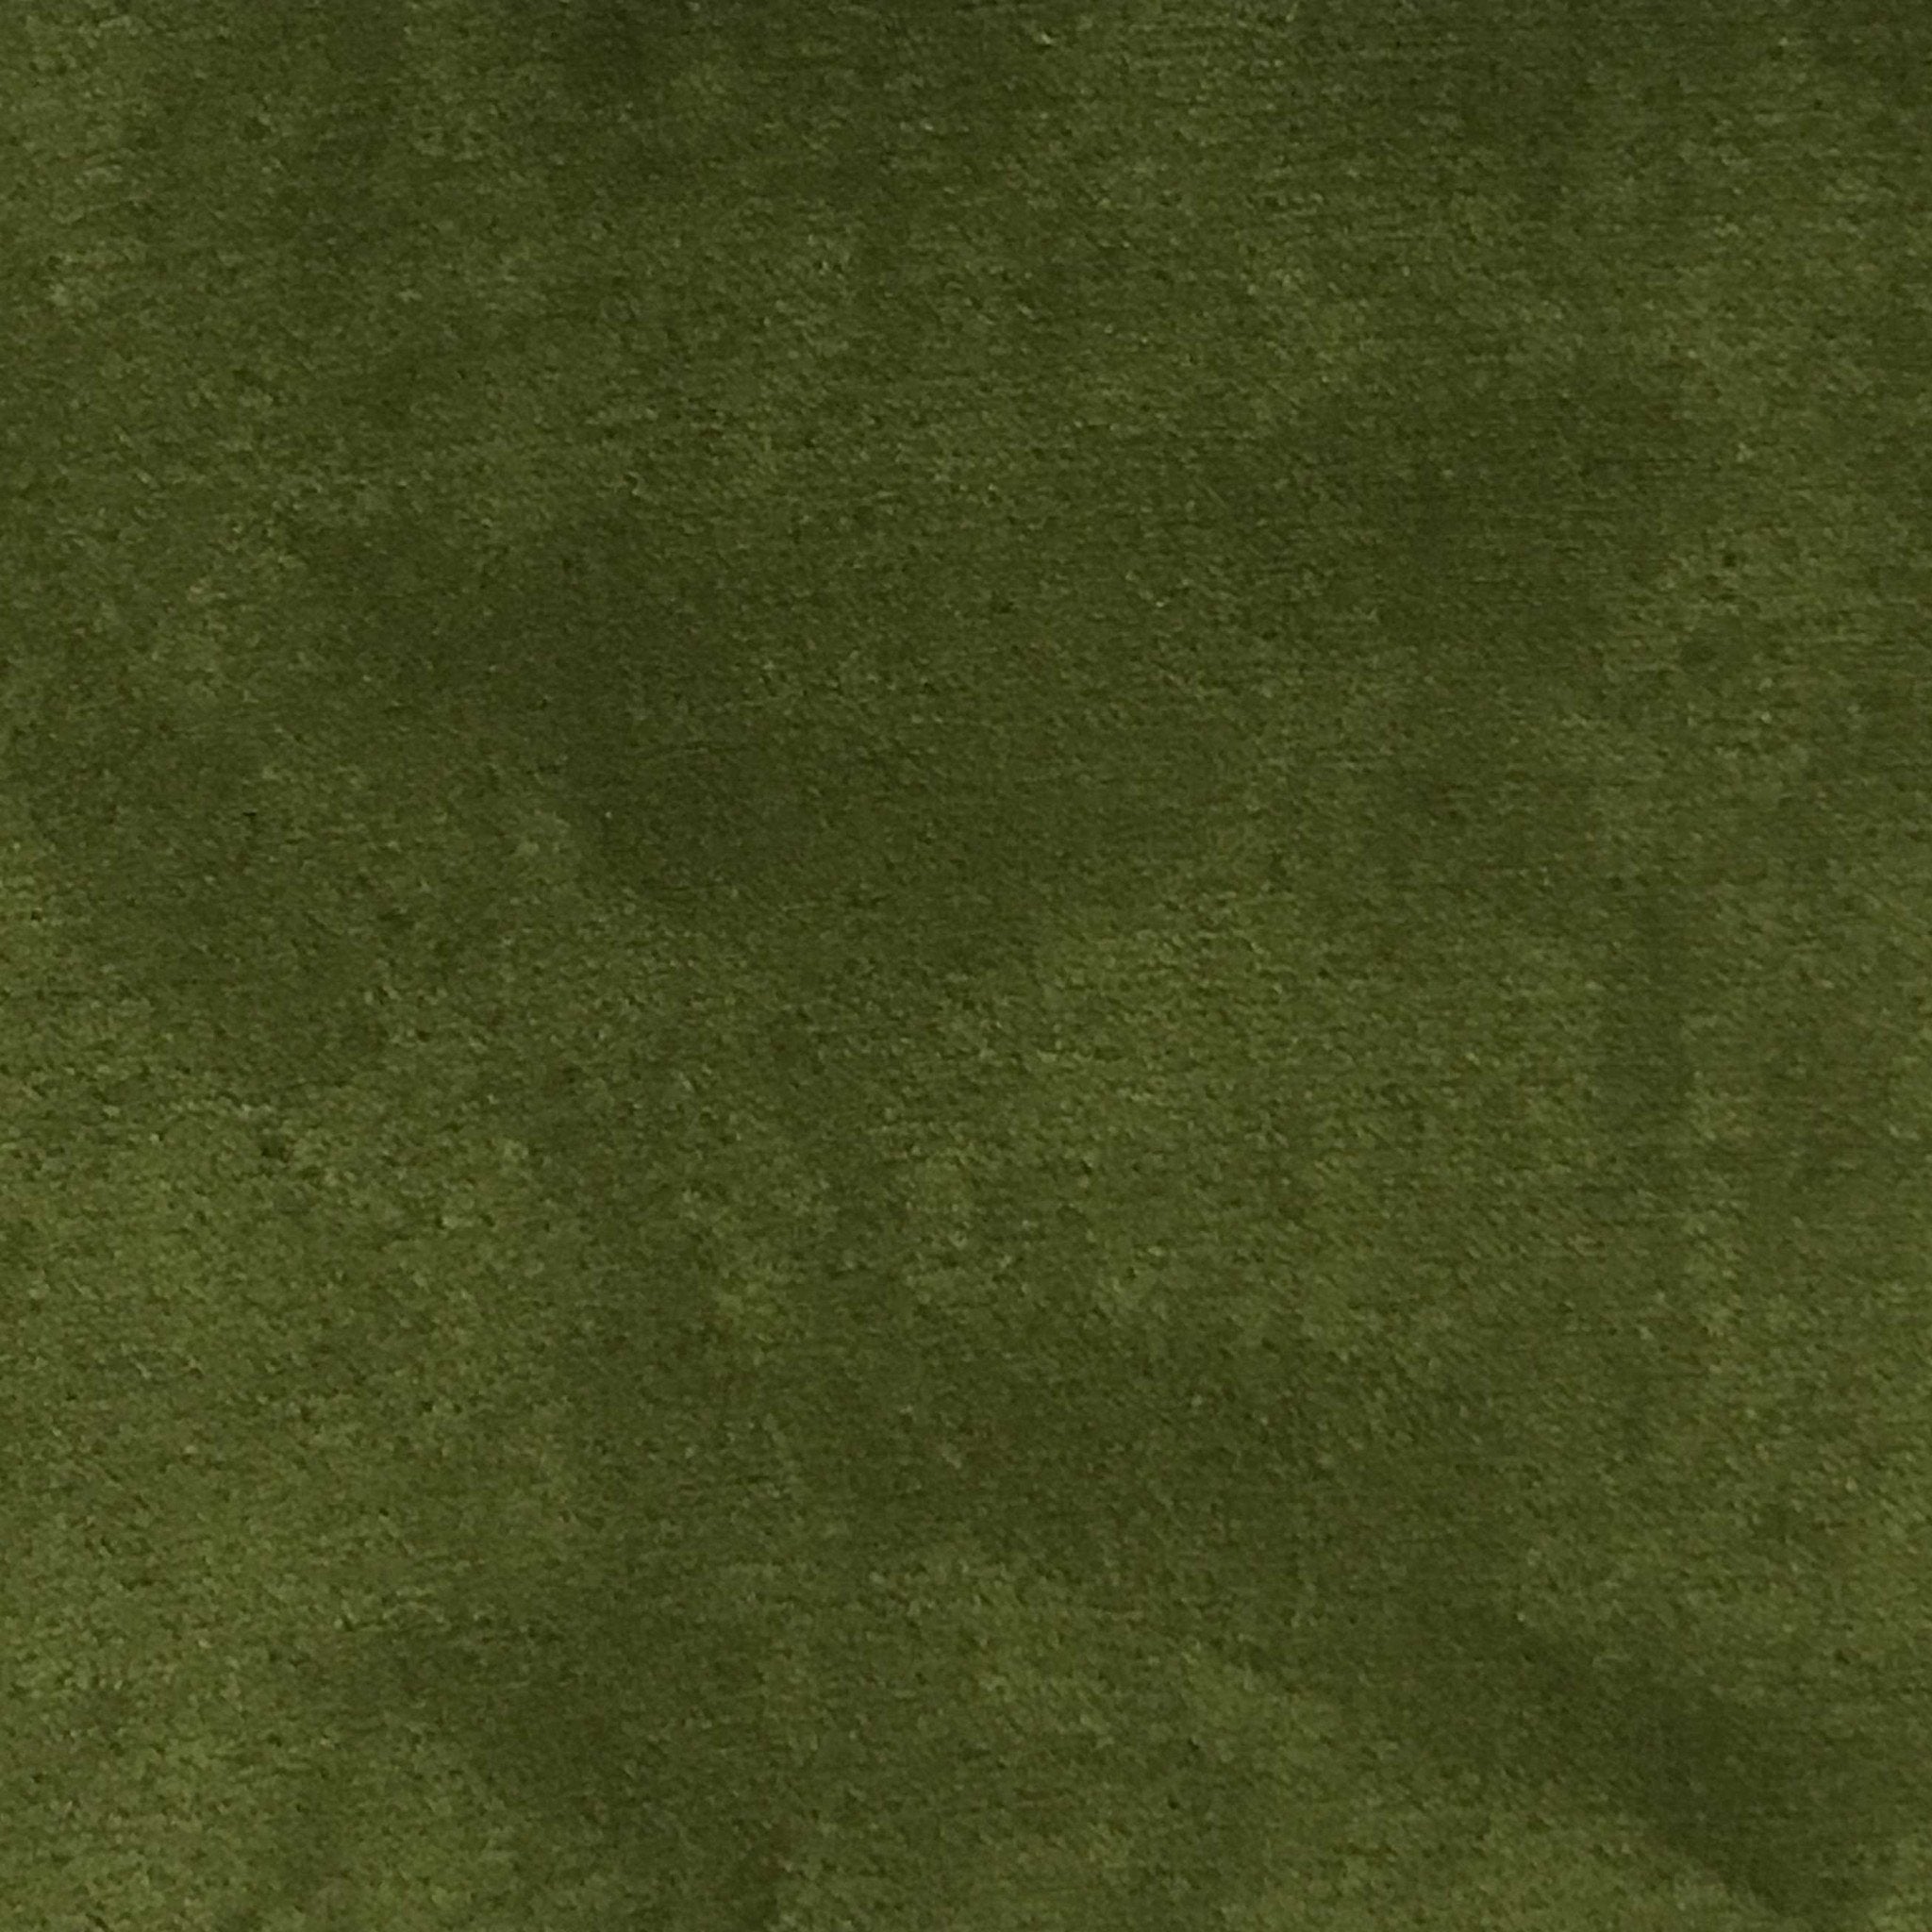 Bottle green suede fabric